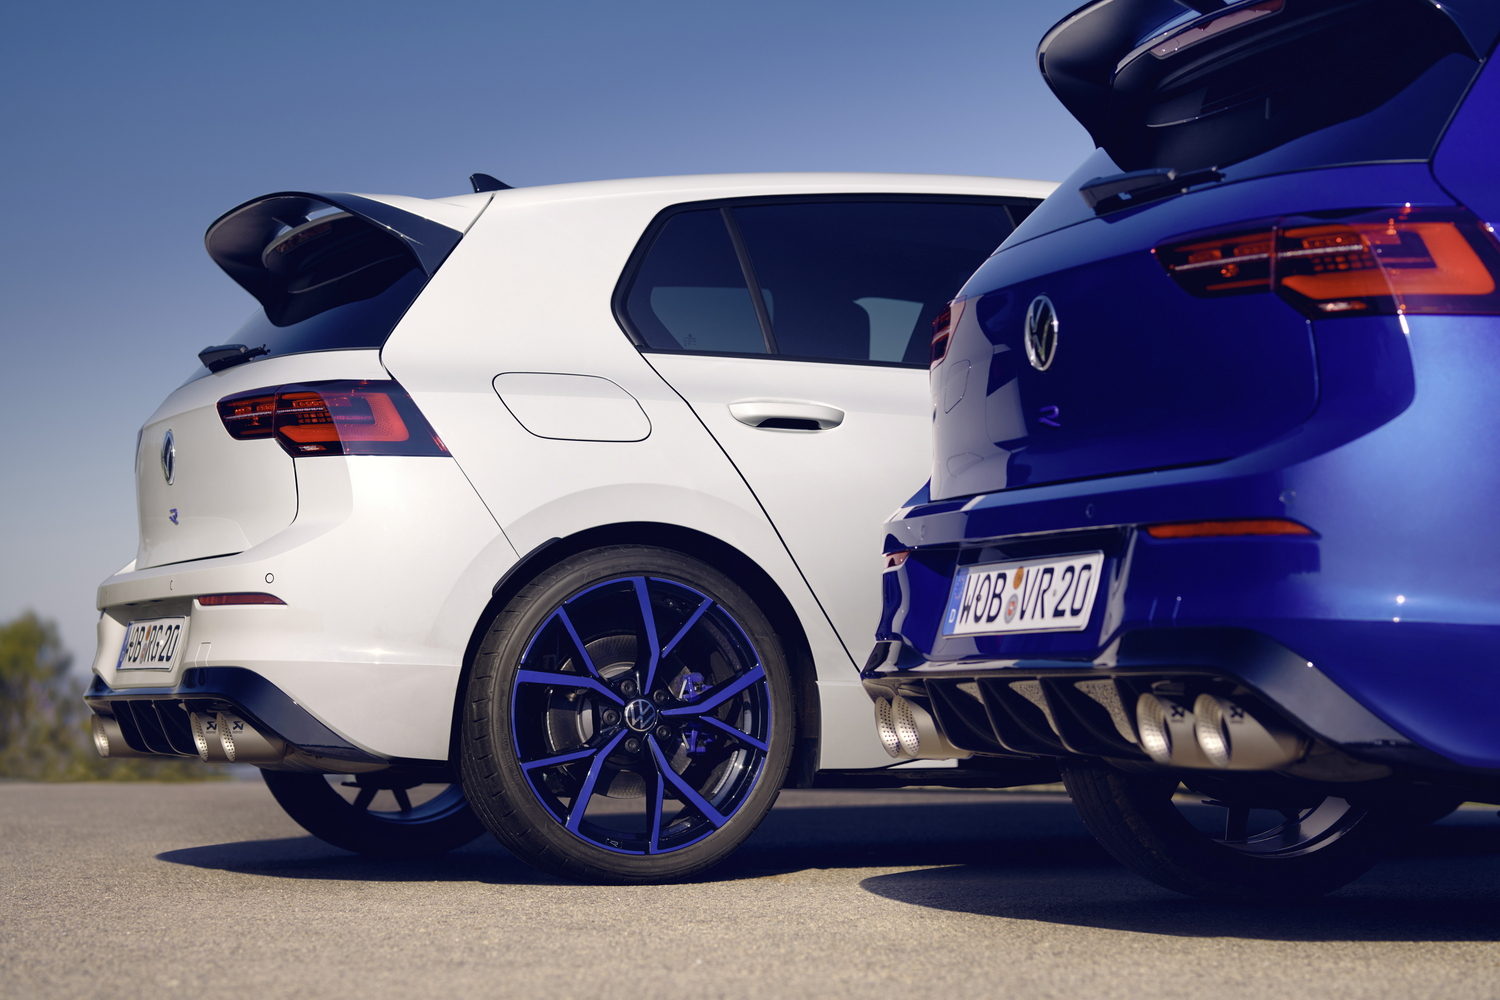 VW celebrates 20 years of the Golf R